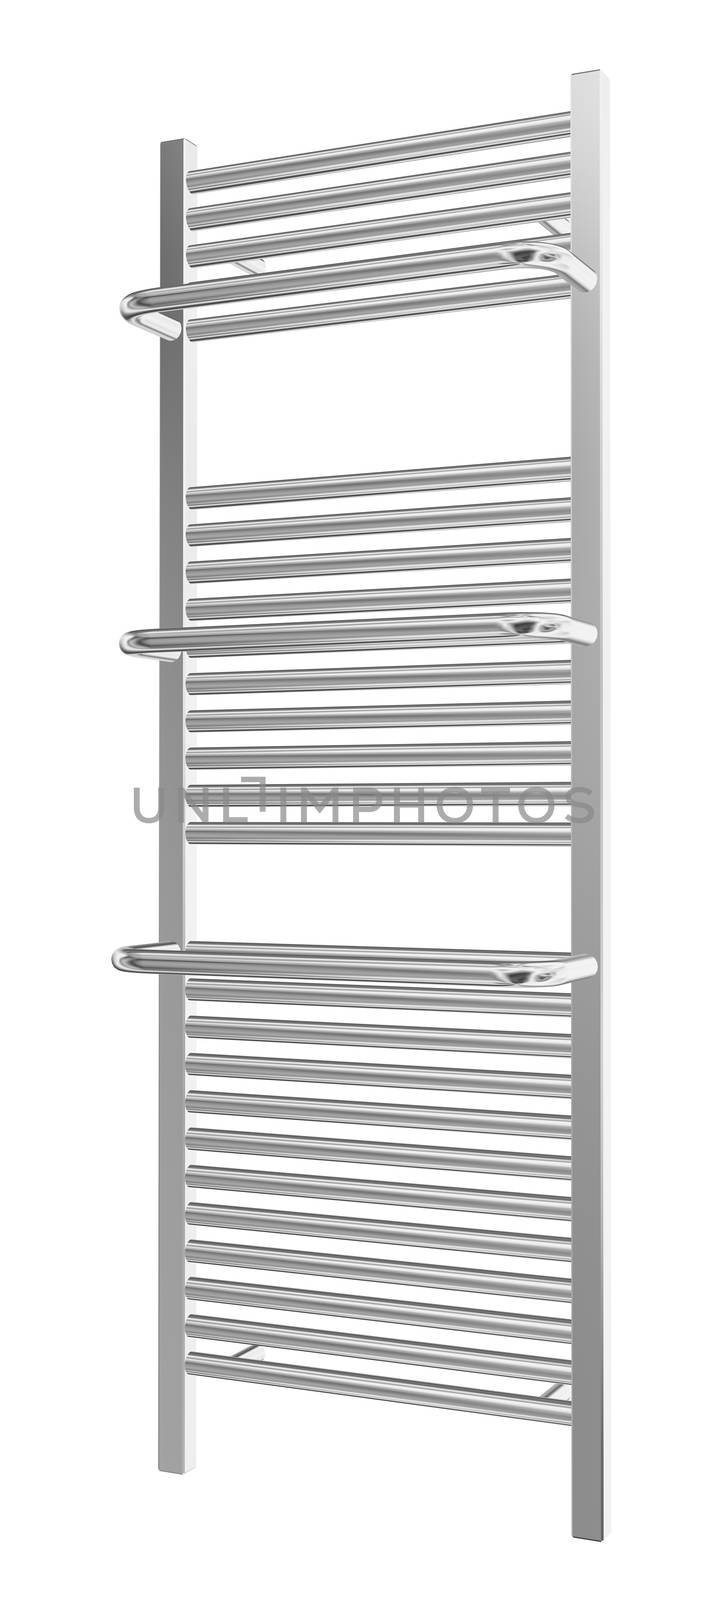 Wall-mounted towel rack with chrome finishing, 3d illustration, isolated against a white background